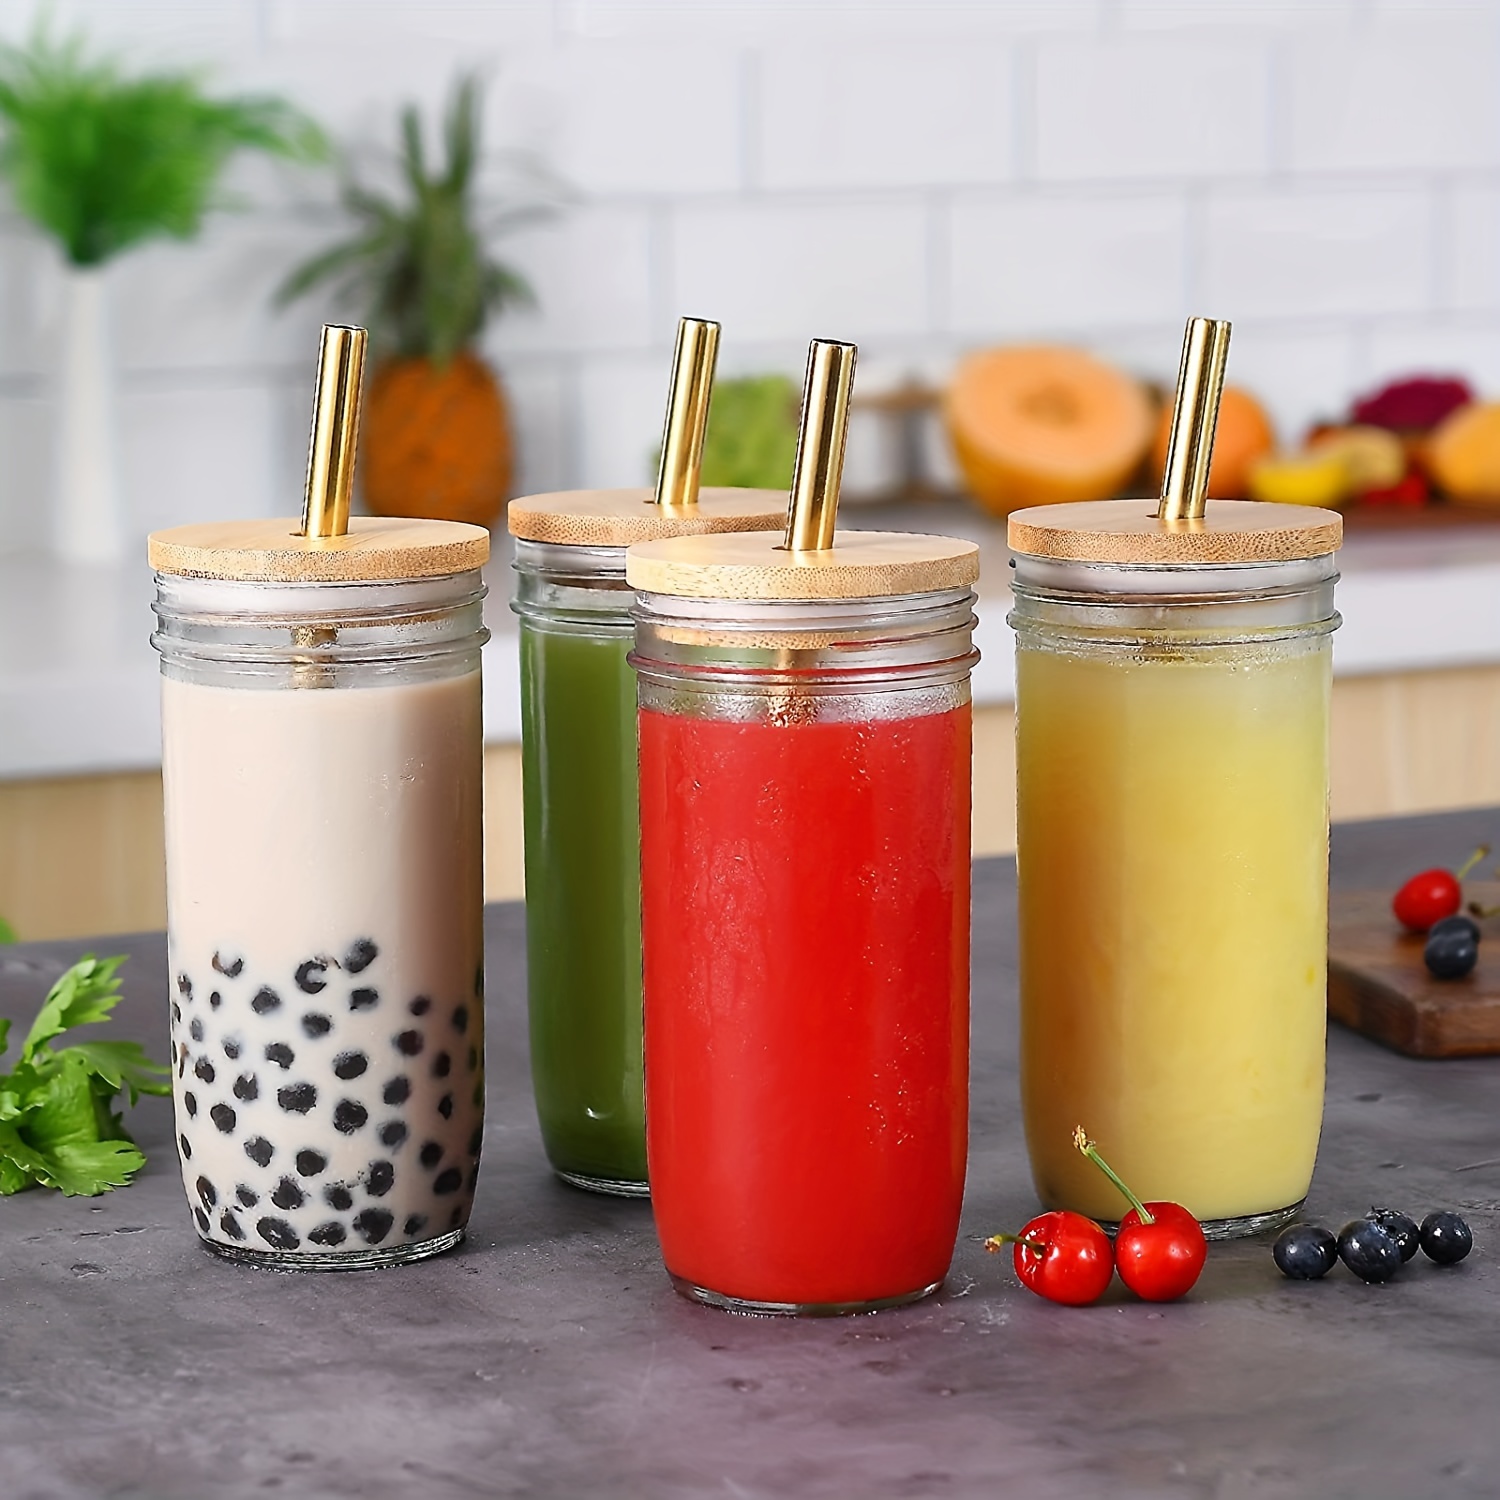 Drinking Glass with Bamboo Lids and Glass Straws, 18.6 oz Can Shaped Glass  Cups , Glass Beer Can Cups with Lids for Iced Coffee, Soda, Whiskey, Bubble  Tea, Water, Juicing, Smoothies, Milk 